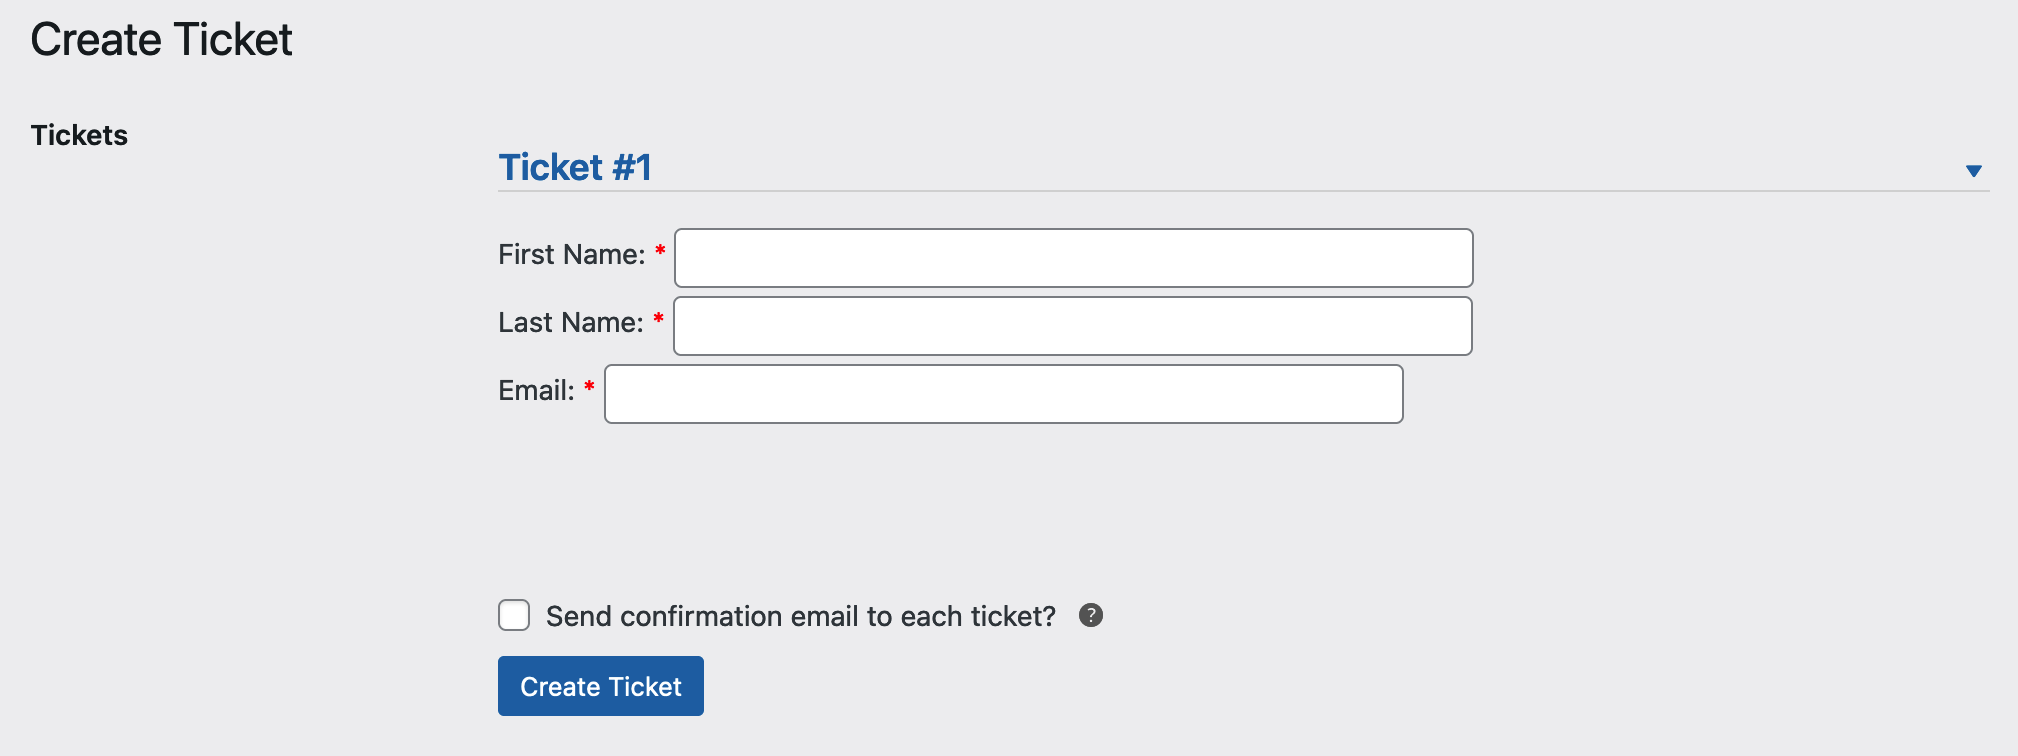 The subsequent screen where ticket details can be entered for each ticket holder specified. 